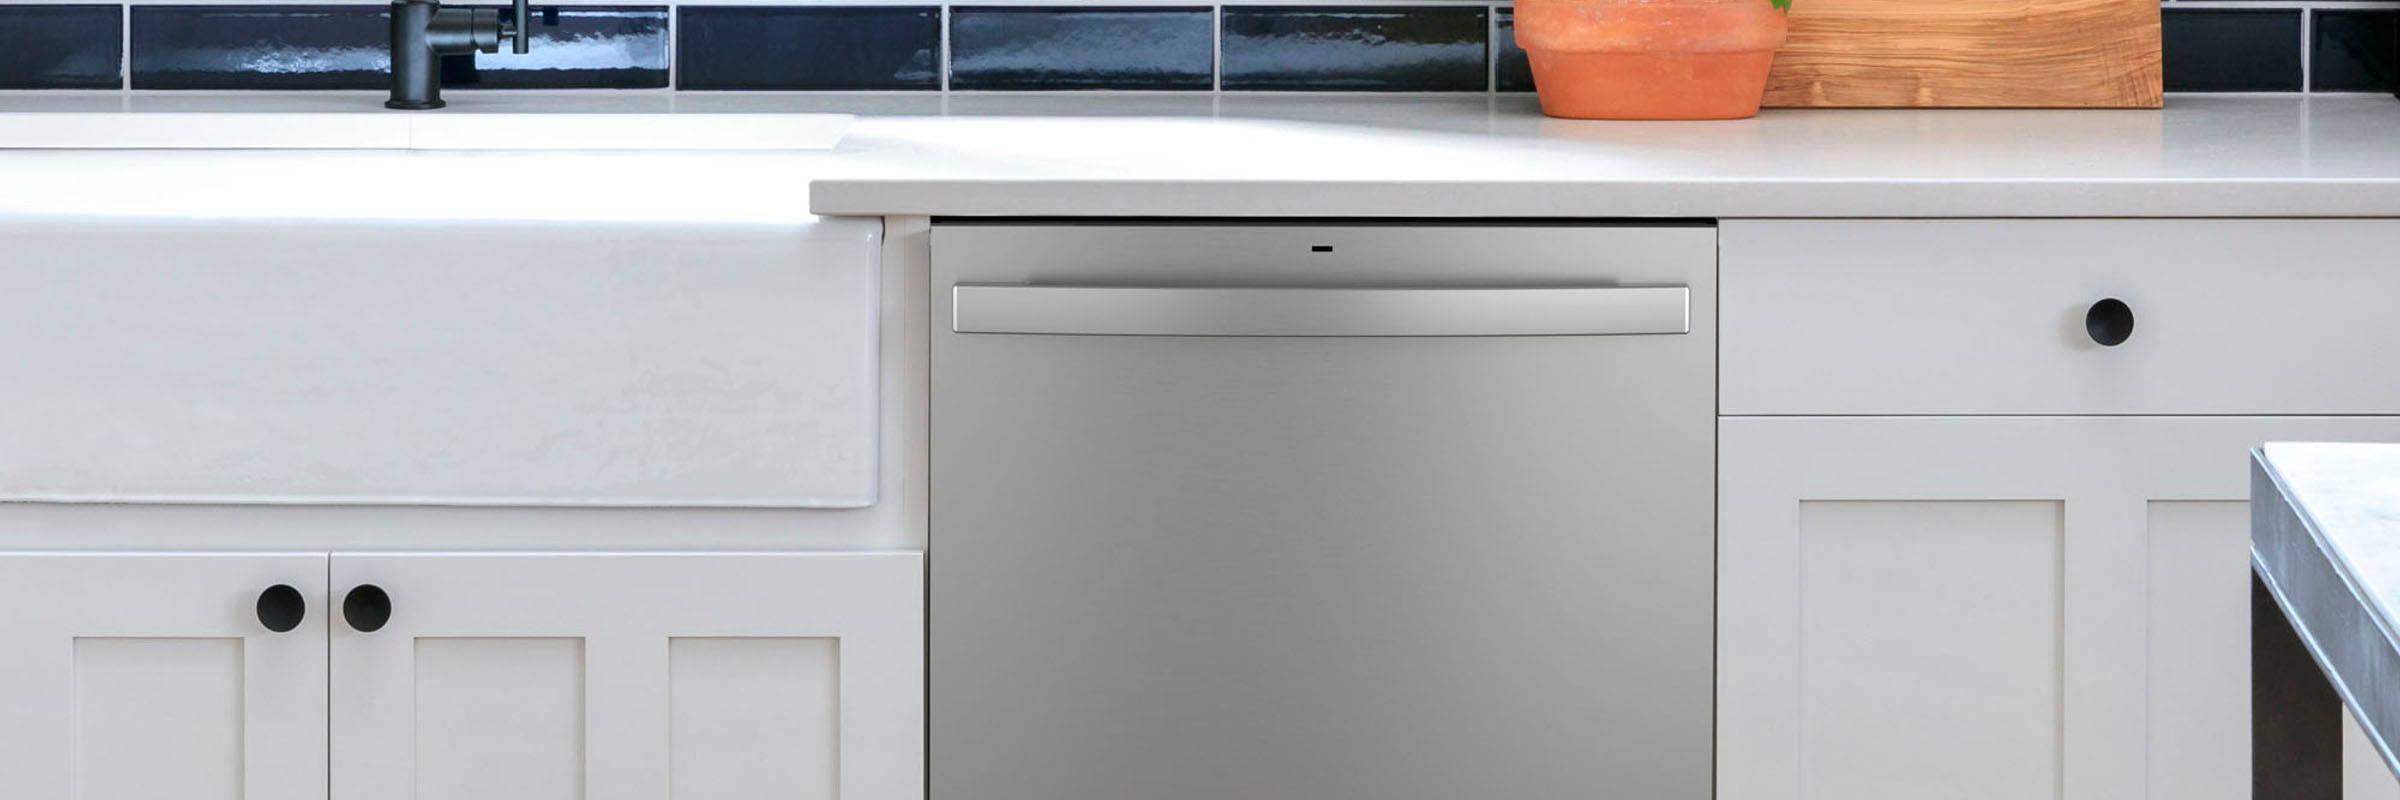 GE Top Control Dishwasher installed in a beautiful kitchen